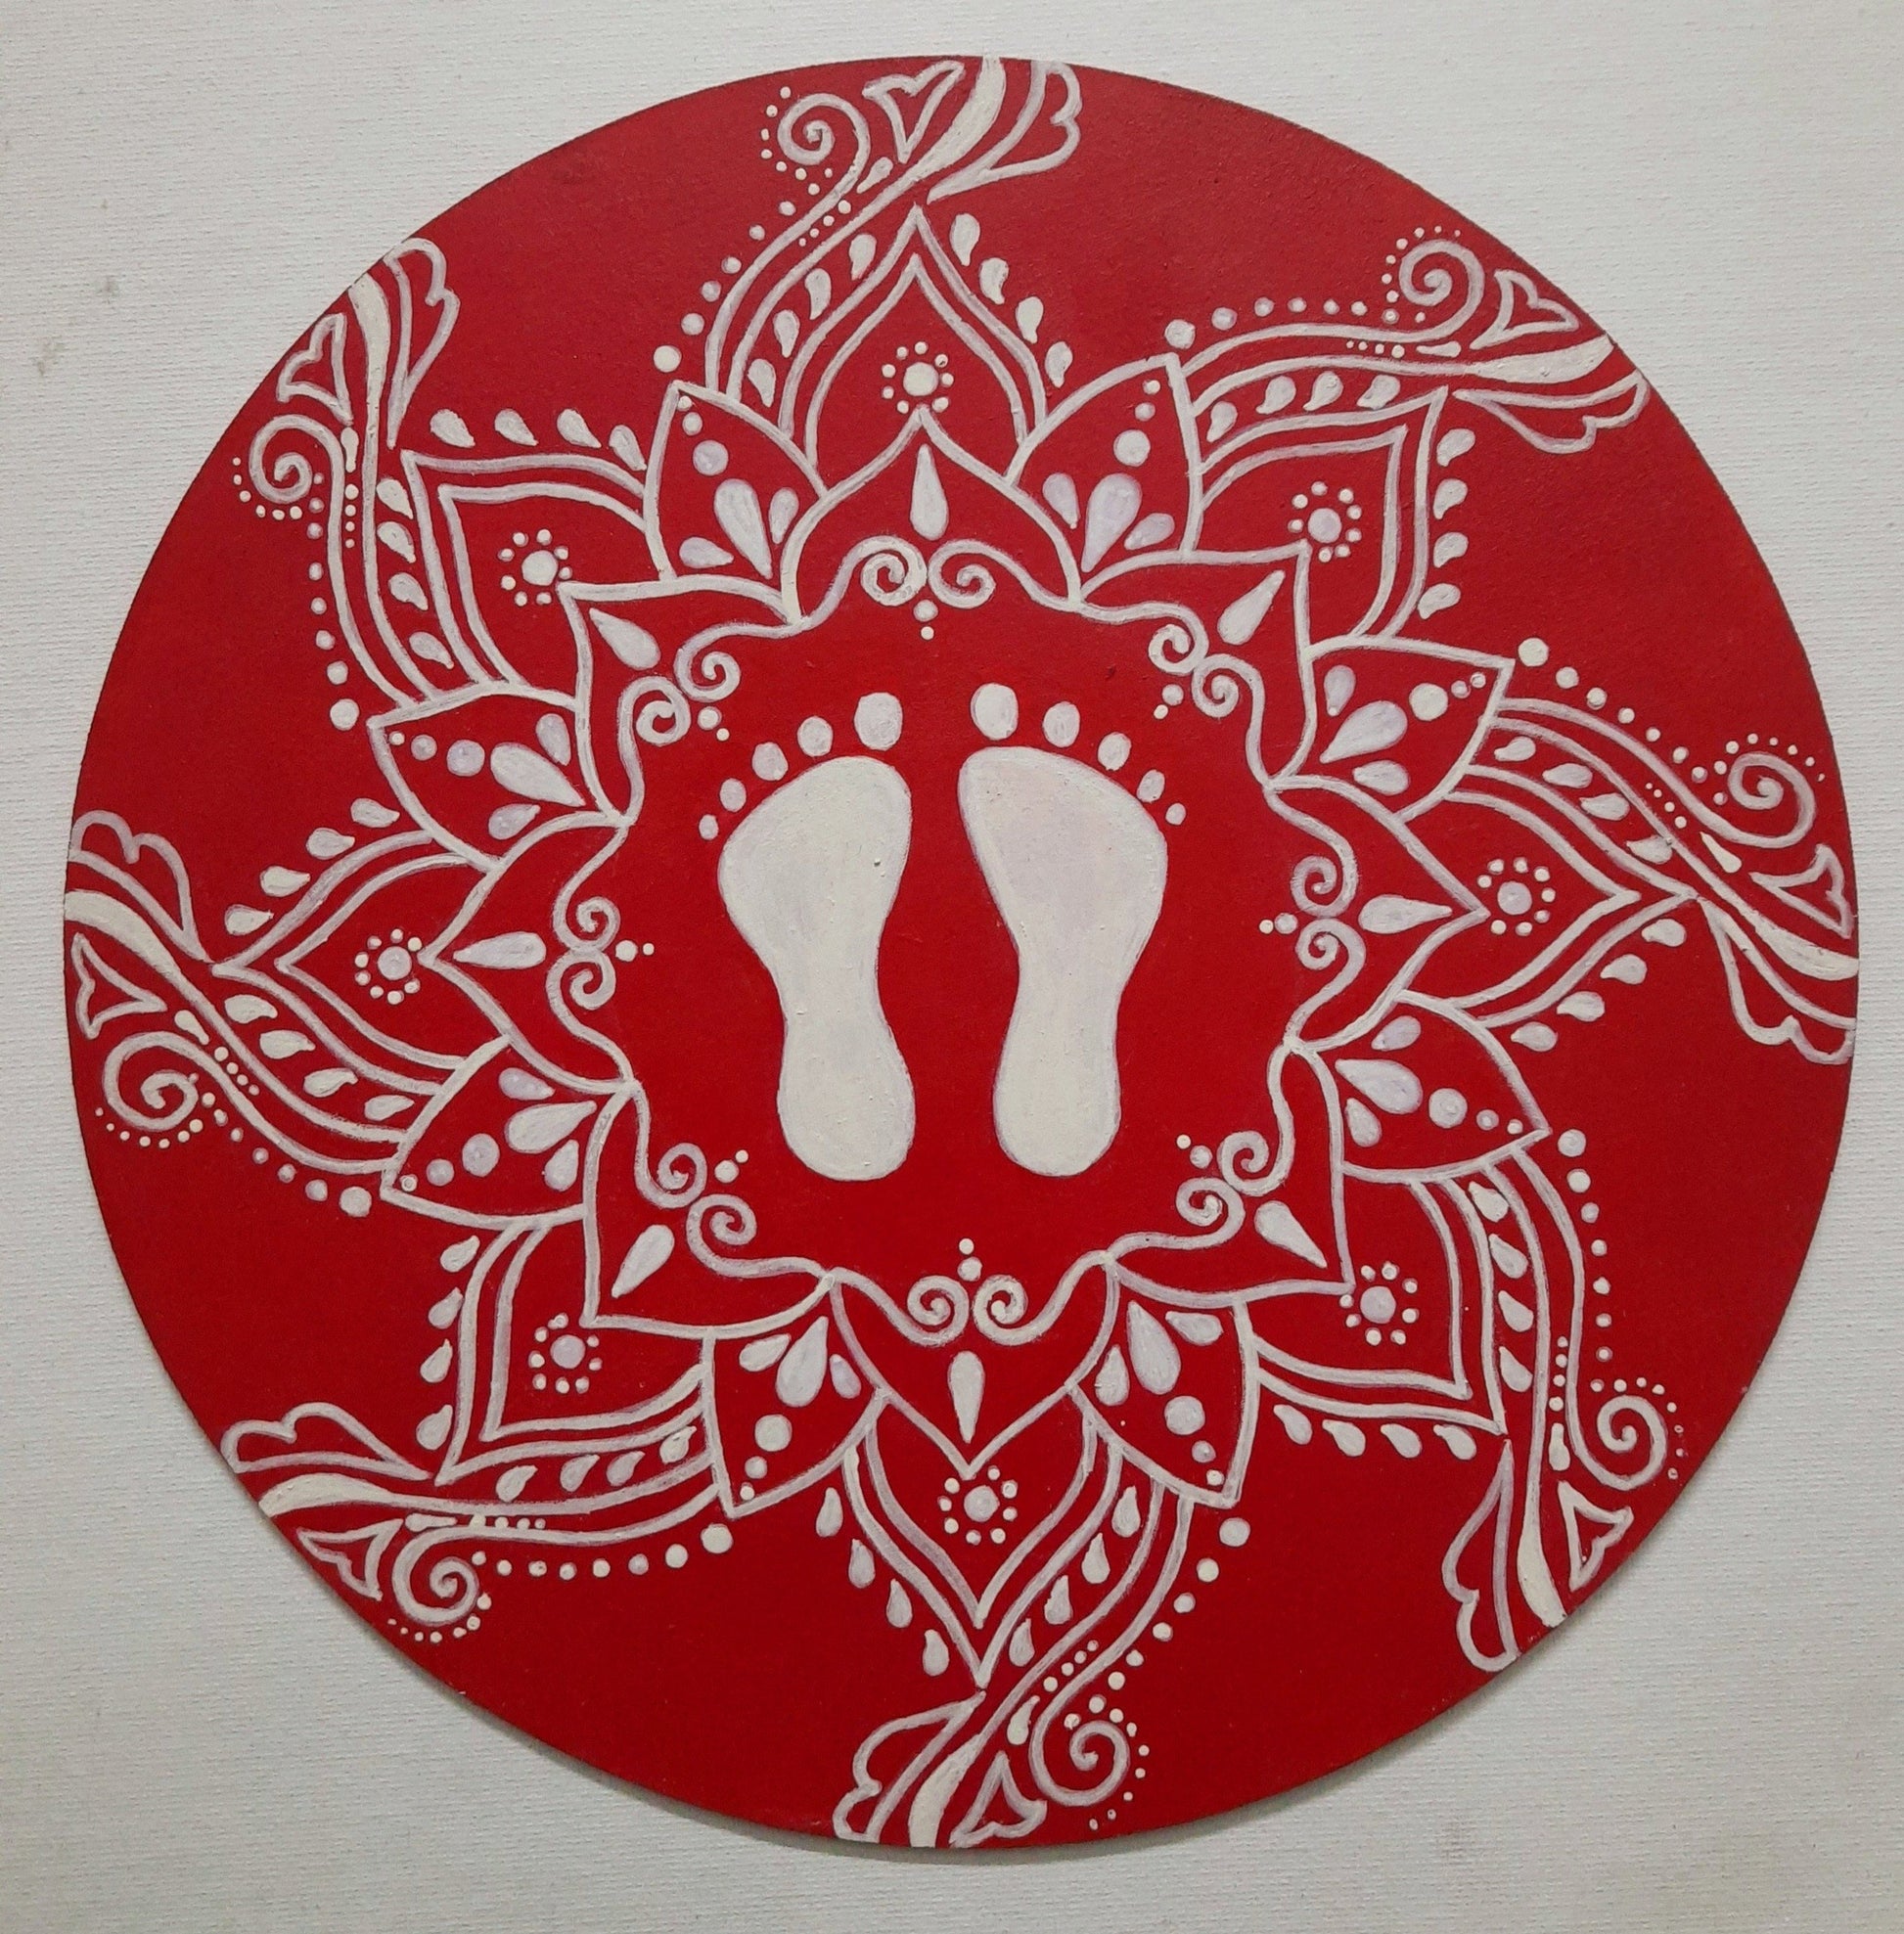 Wall plate on 10" round mdf board with traditional alpona design